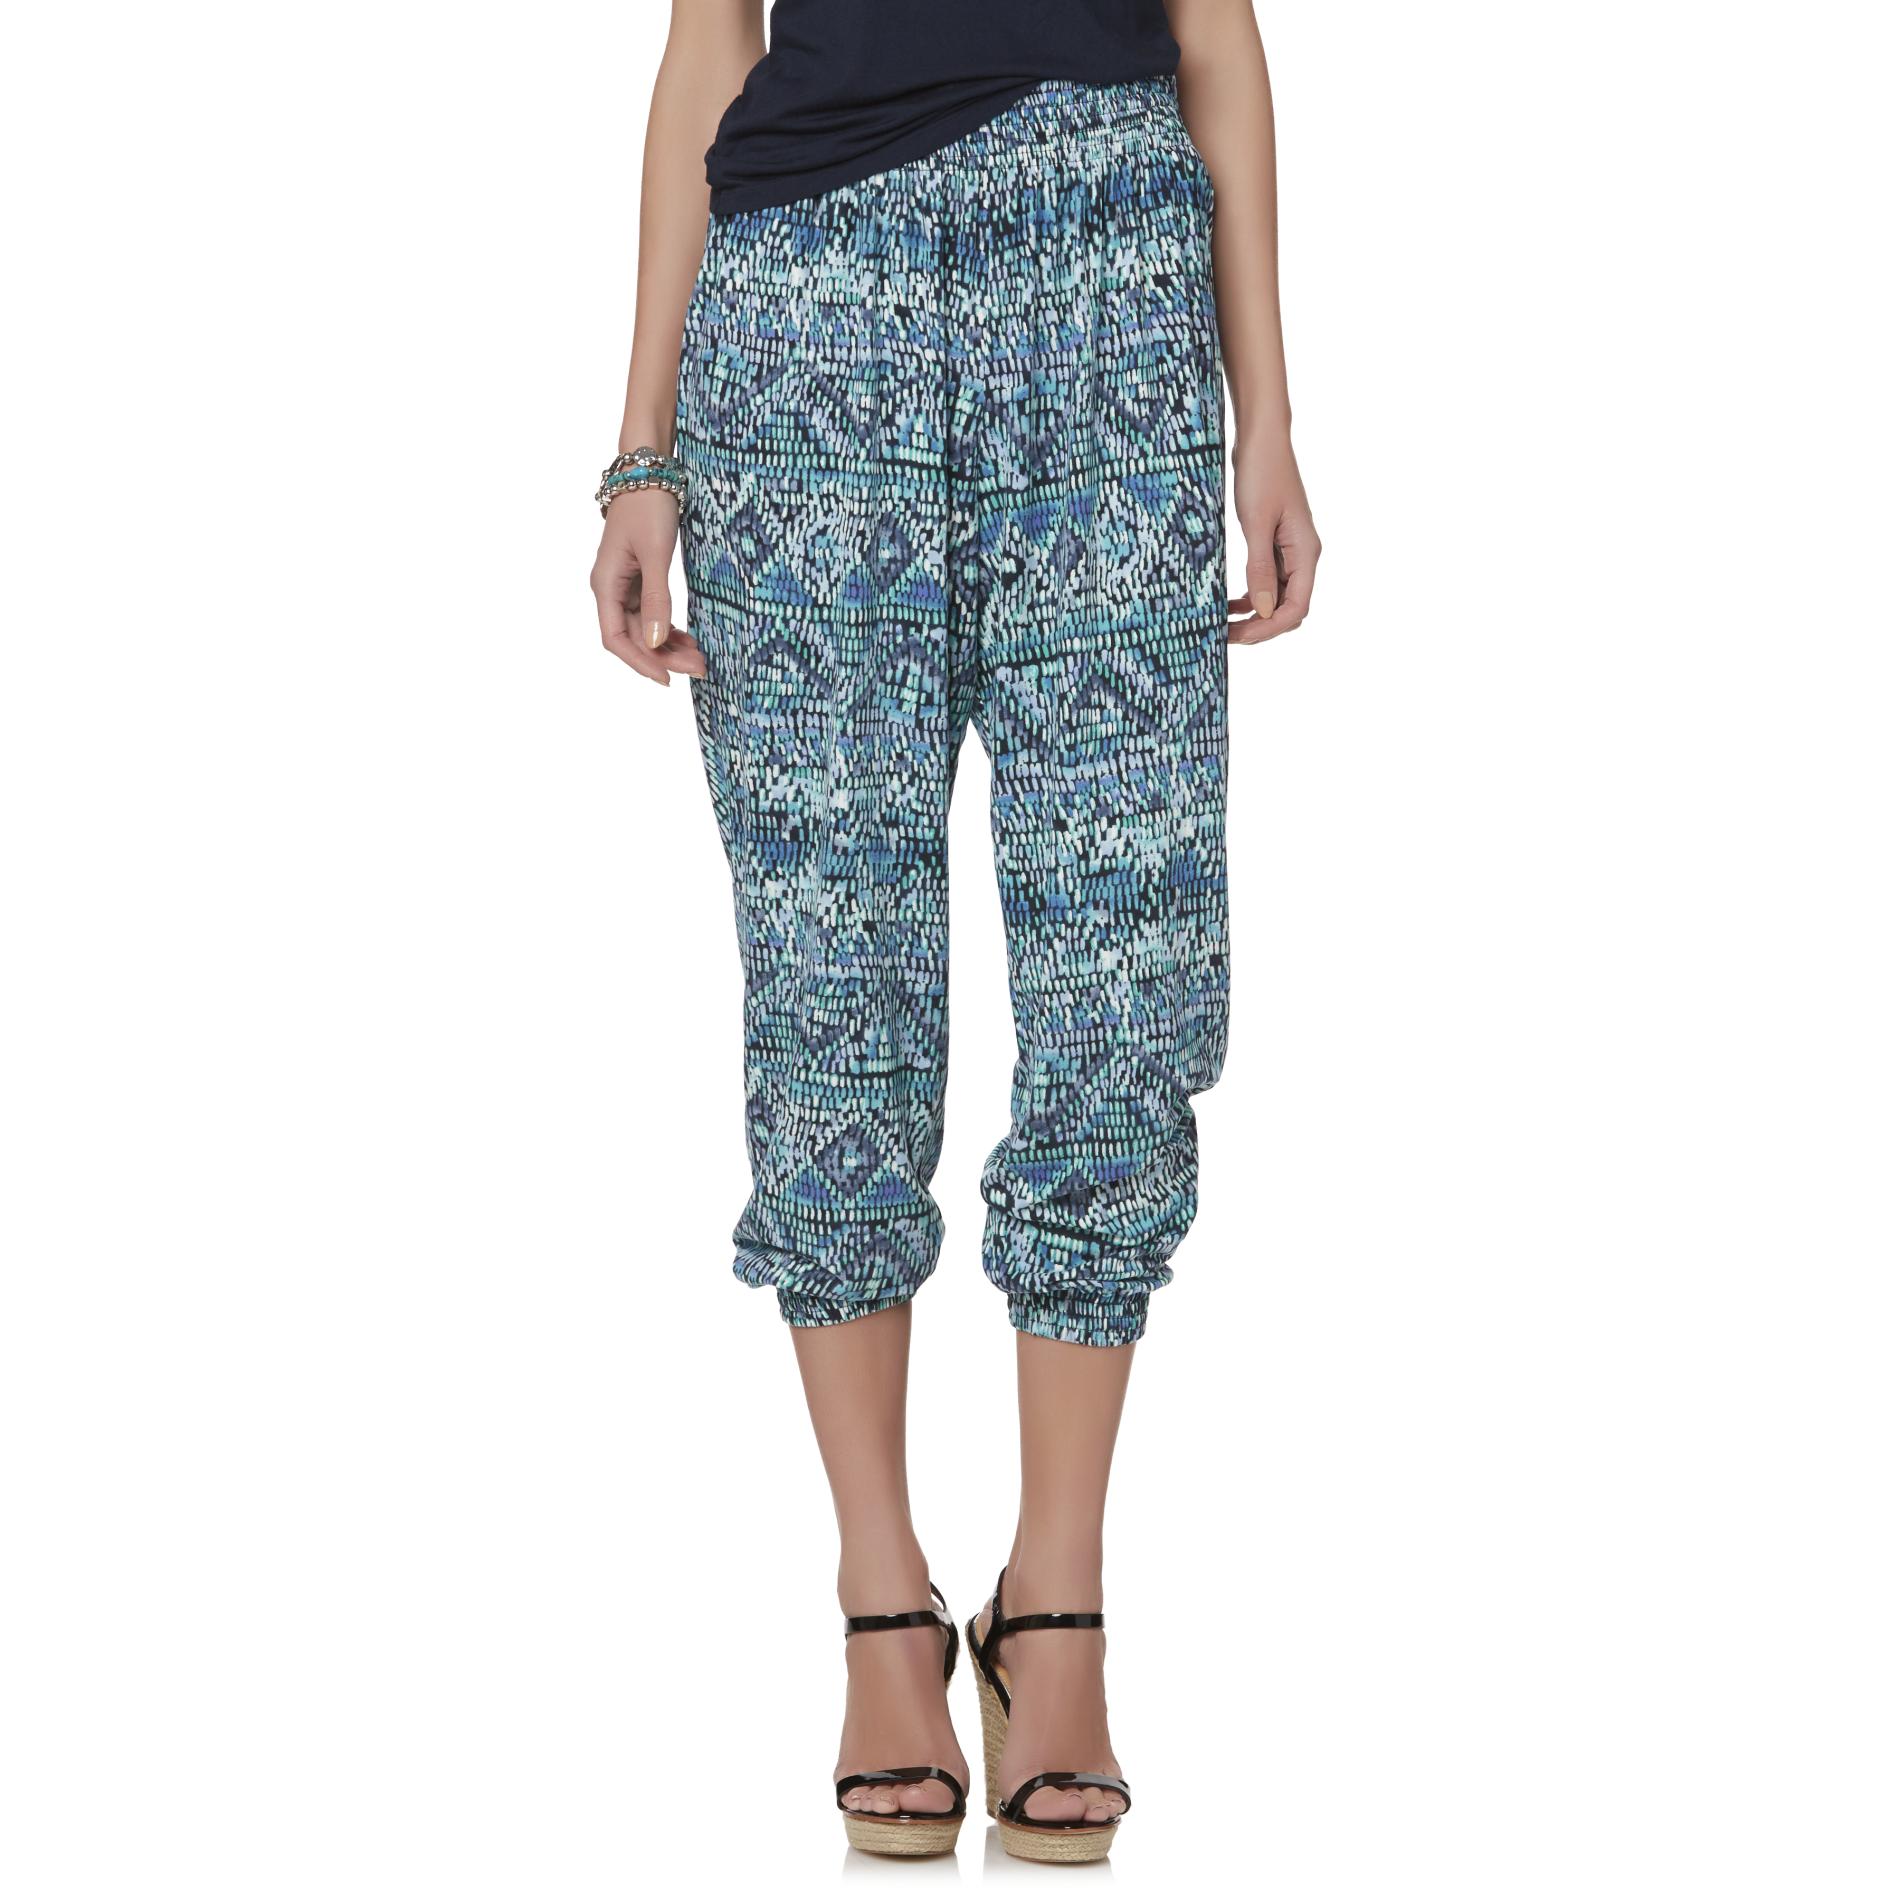 Simply Styled Women's Jogger Pants - Tribal